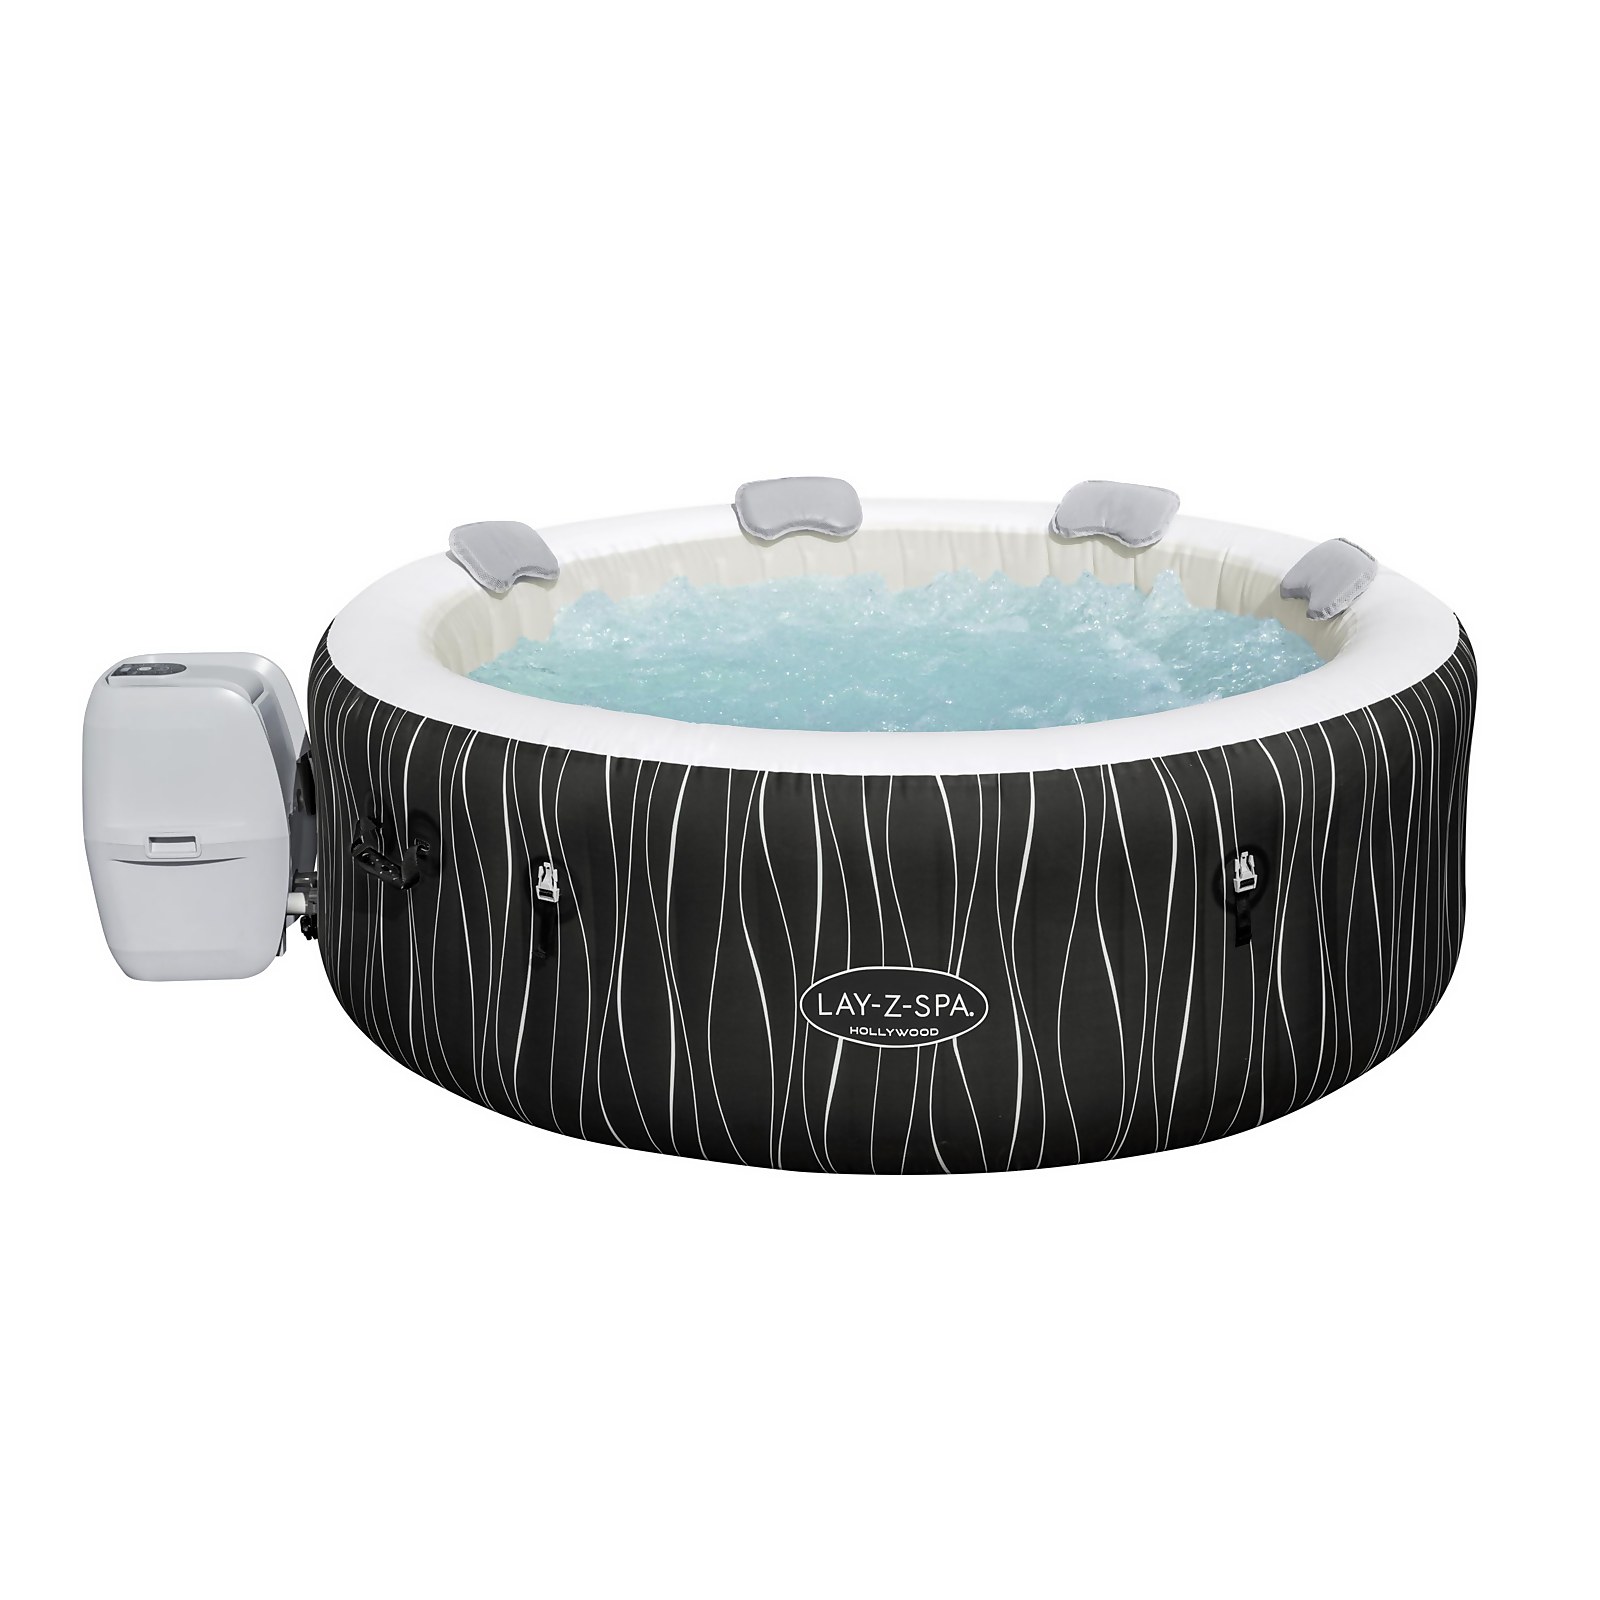 Lay-Z-Spa Hollywood Airjet 4-6 Person Hot Tub